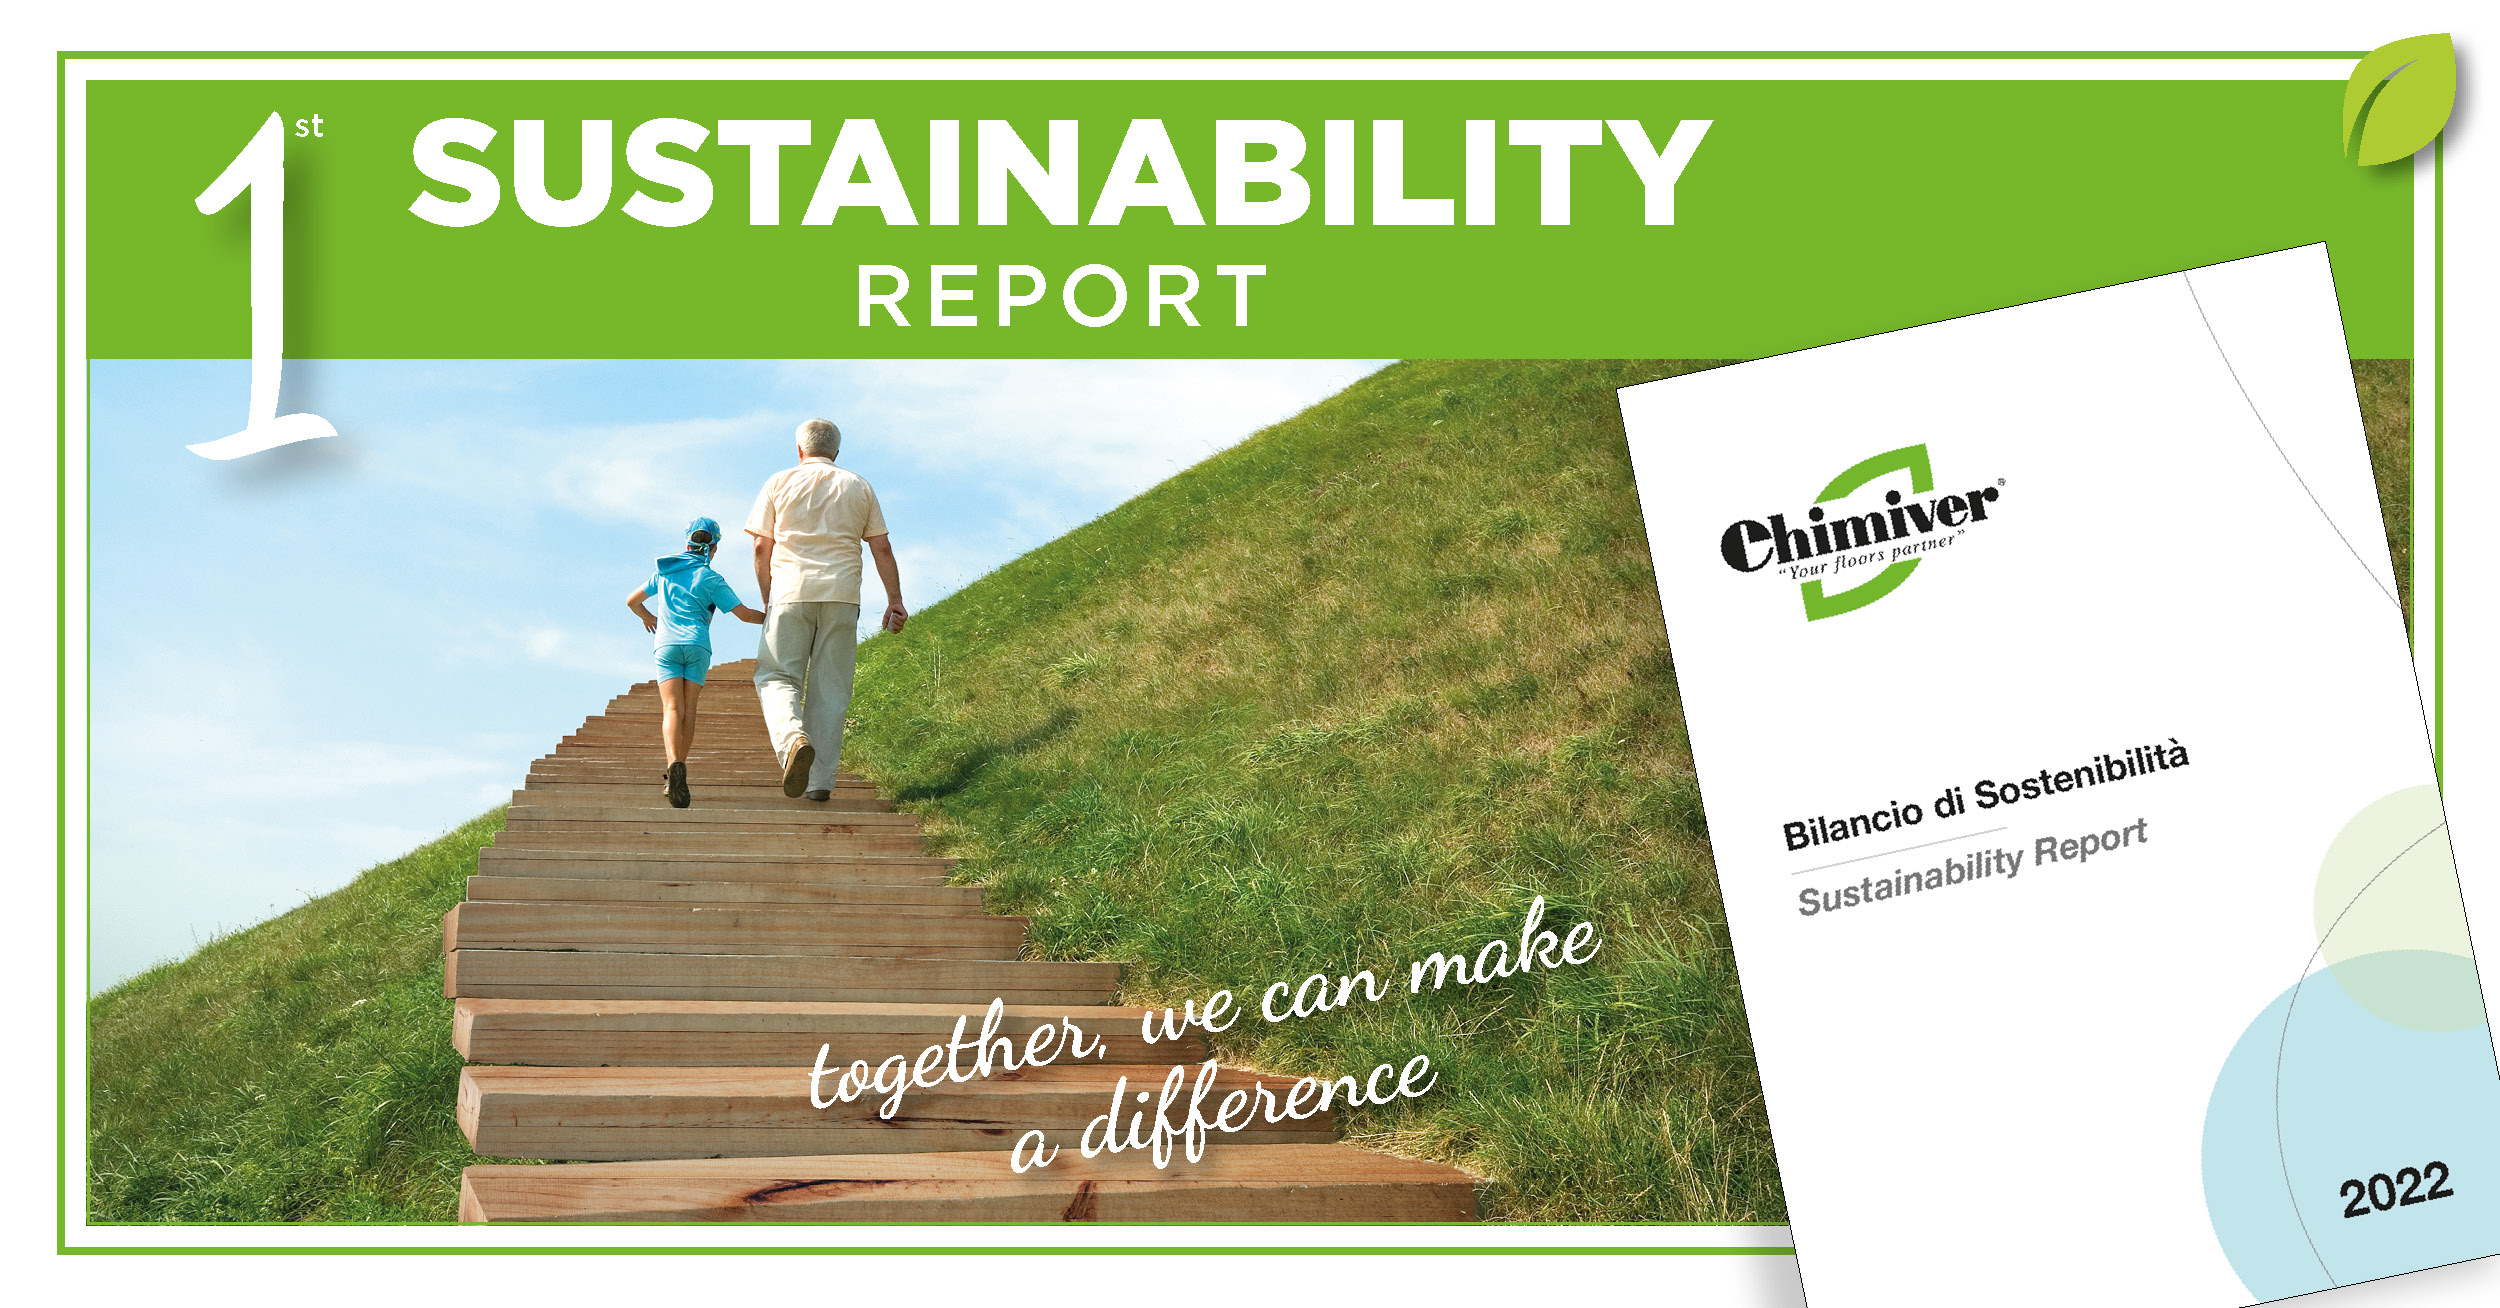 PRESS RELEASE: Chimiver presents its first Sustainability Report